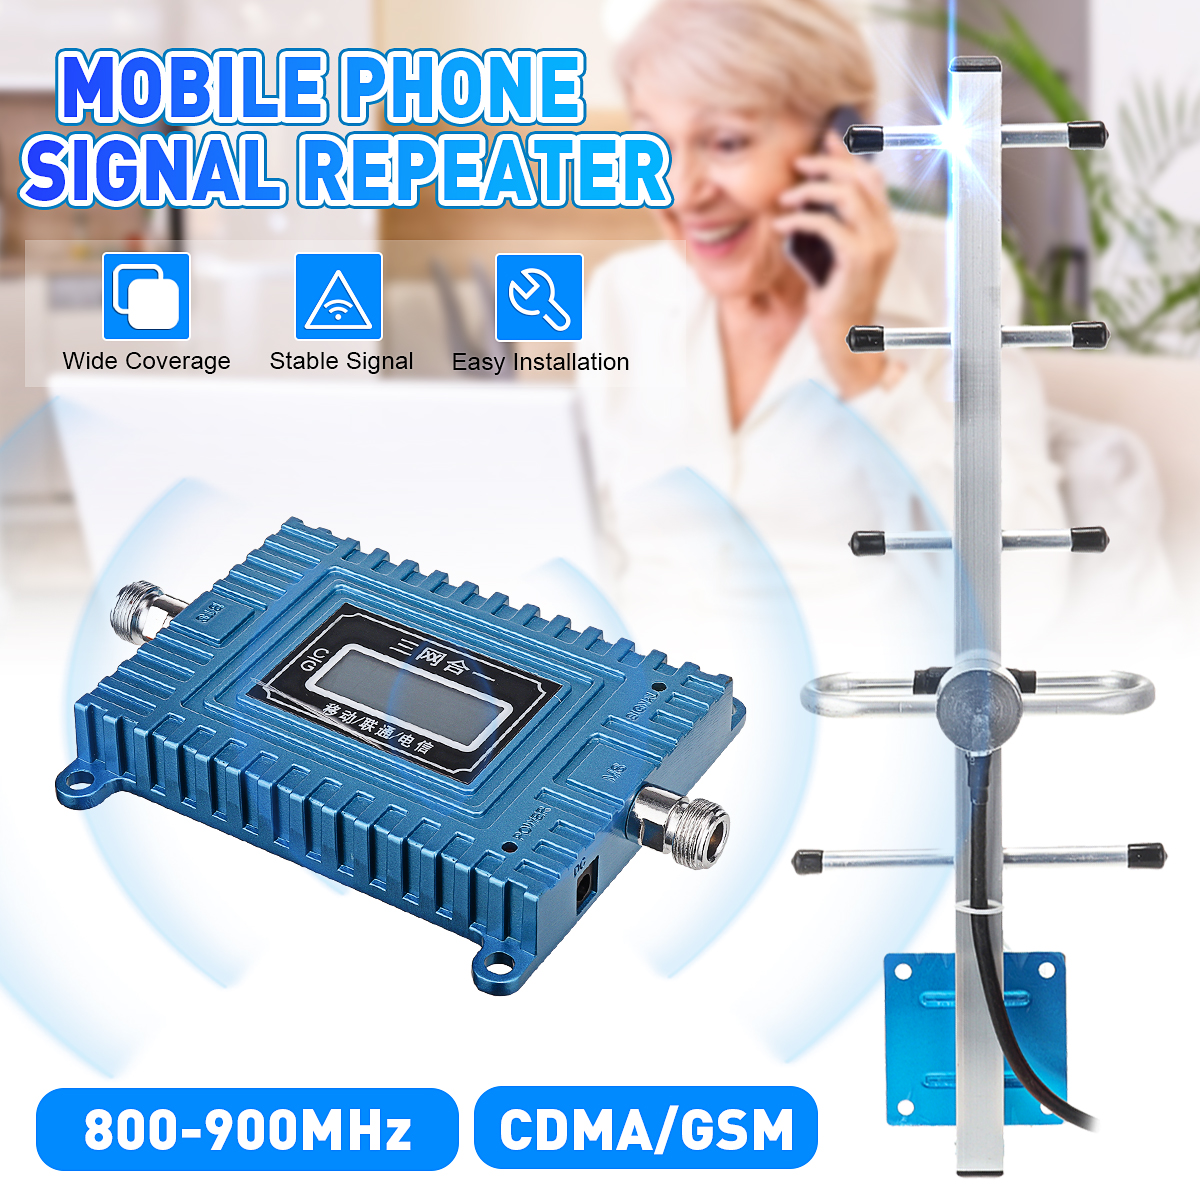 850900MHz-CDMAGSM-Cell-Phone-Signal-Booster-Repeater-Amplifier-Antenna-234G-1860438-1